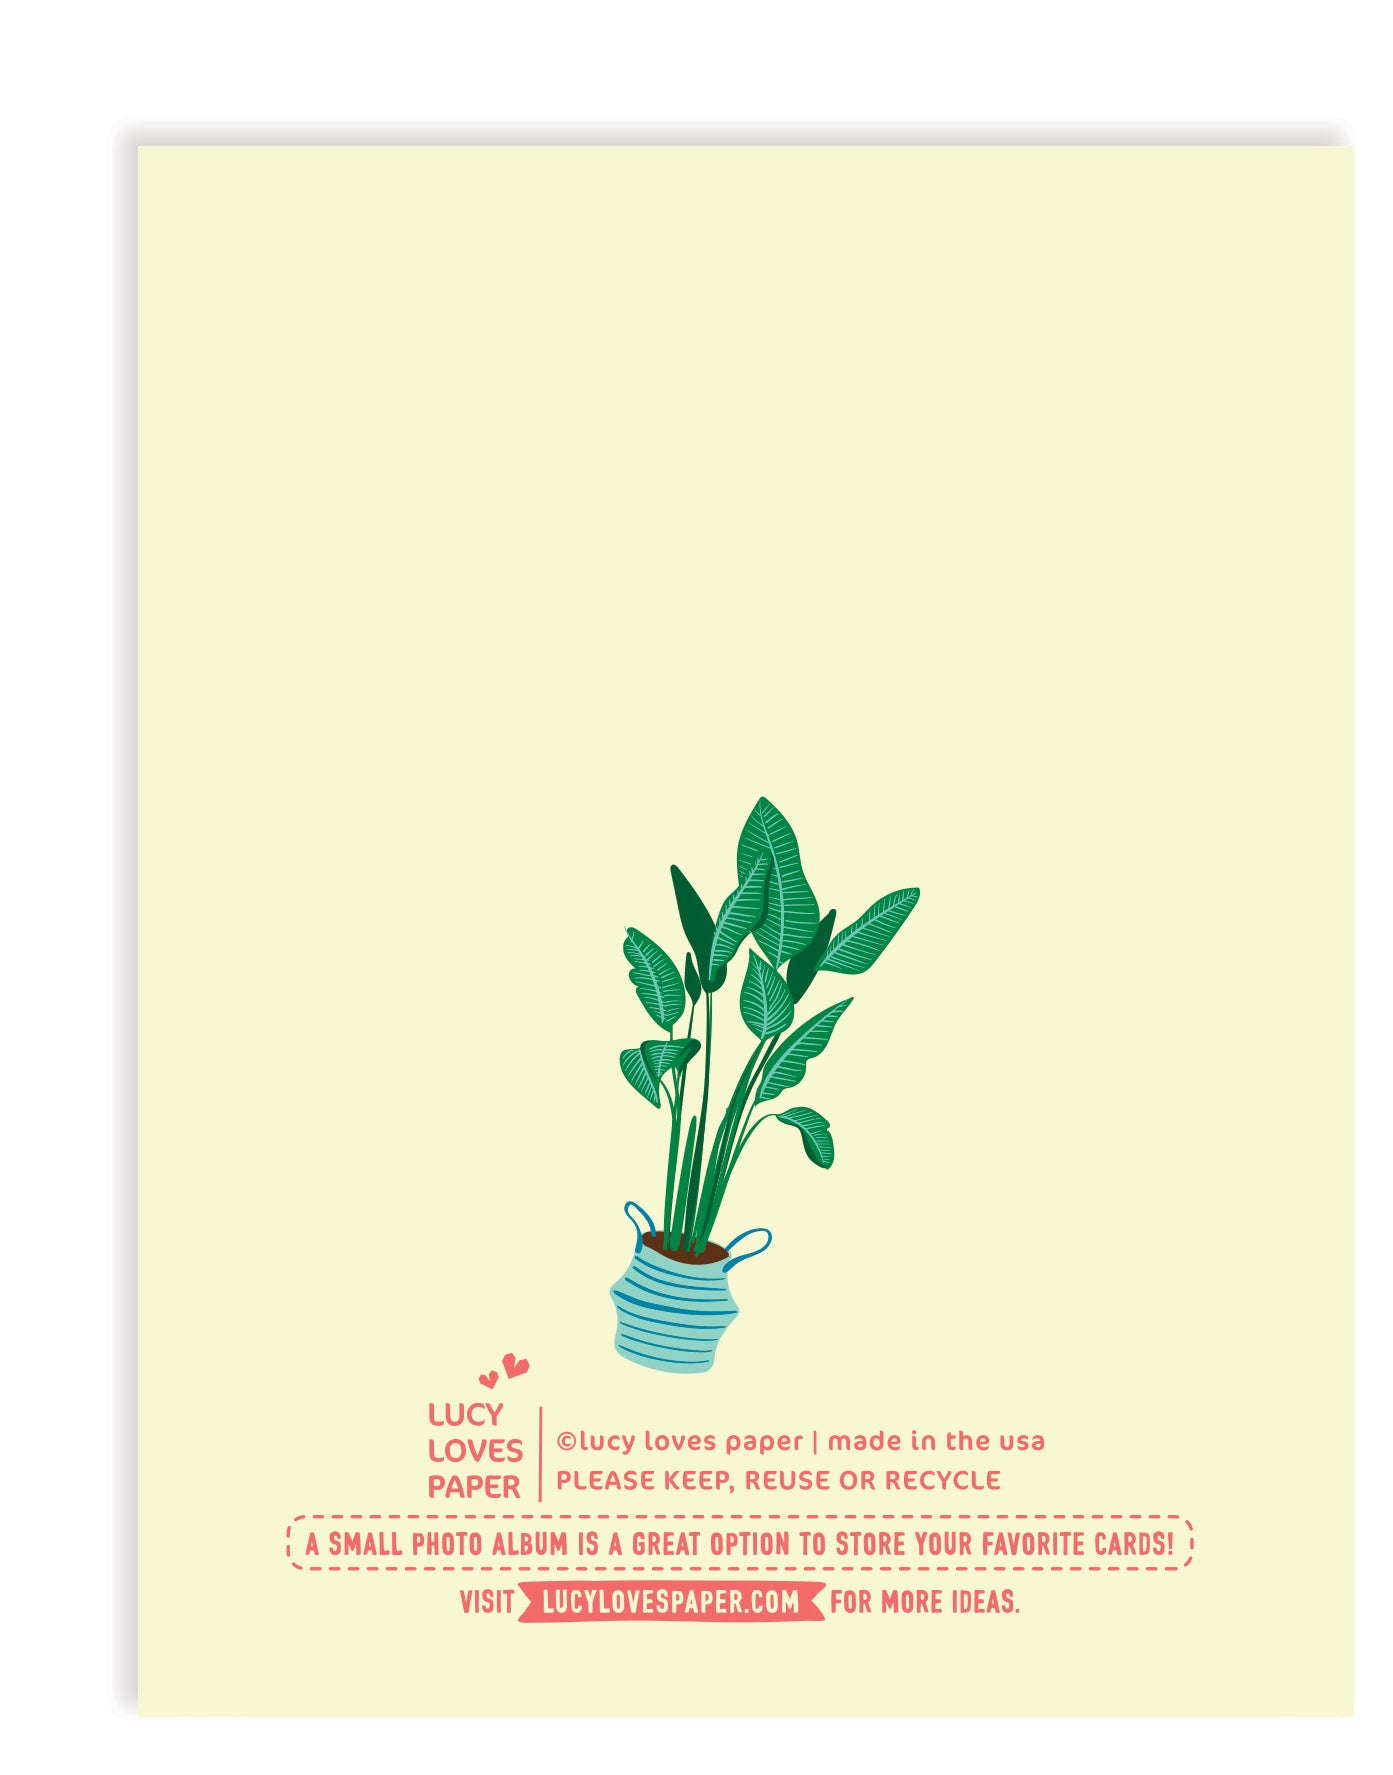 NEW PLACE, NEW PLANTS CARD